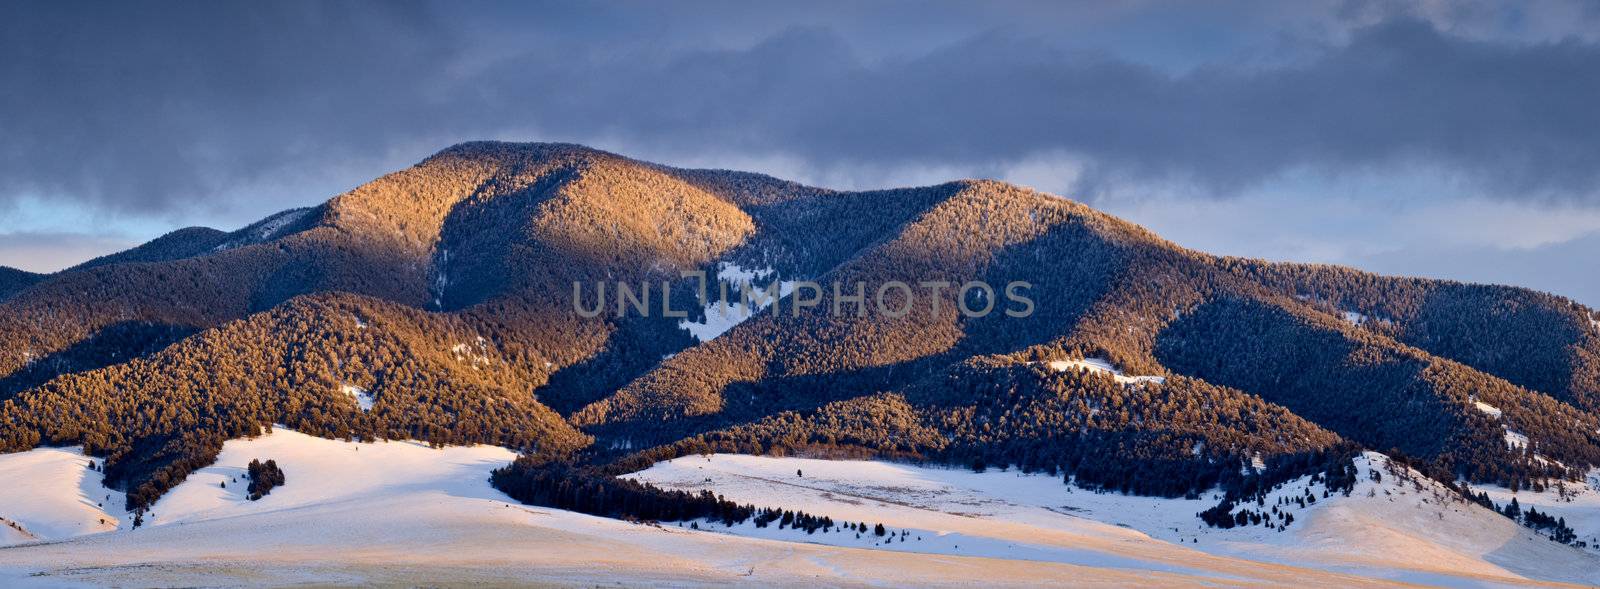 Forested Ridge in winter at sunset, Gallatin National Forest, Montana, USA by CharlesBolin